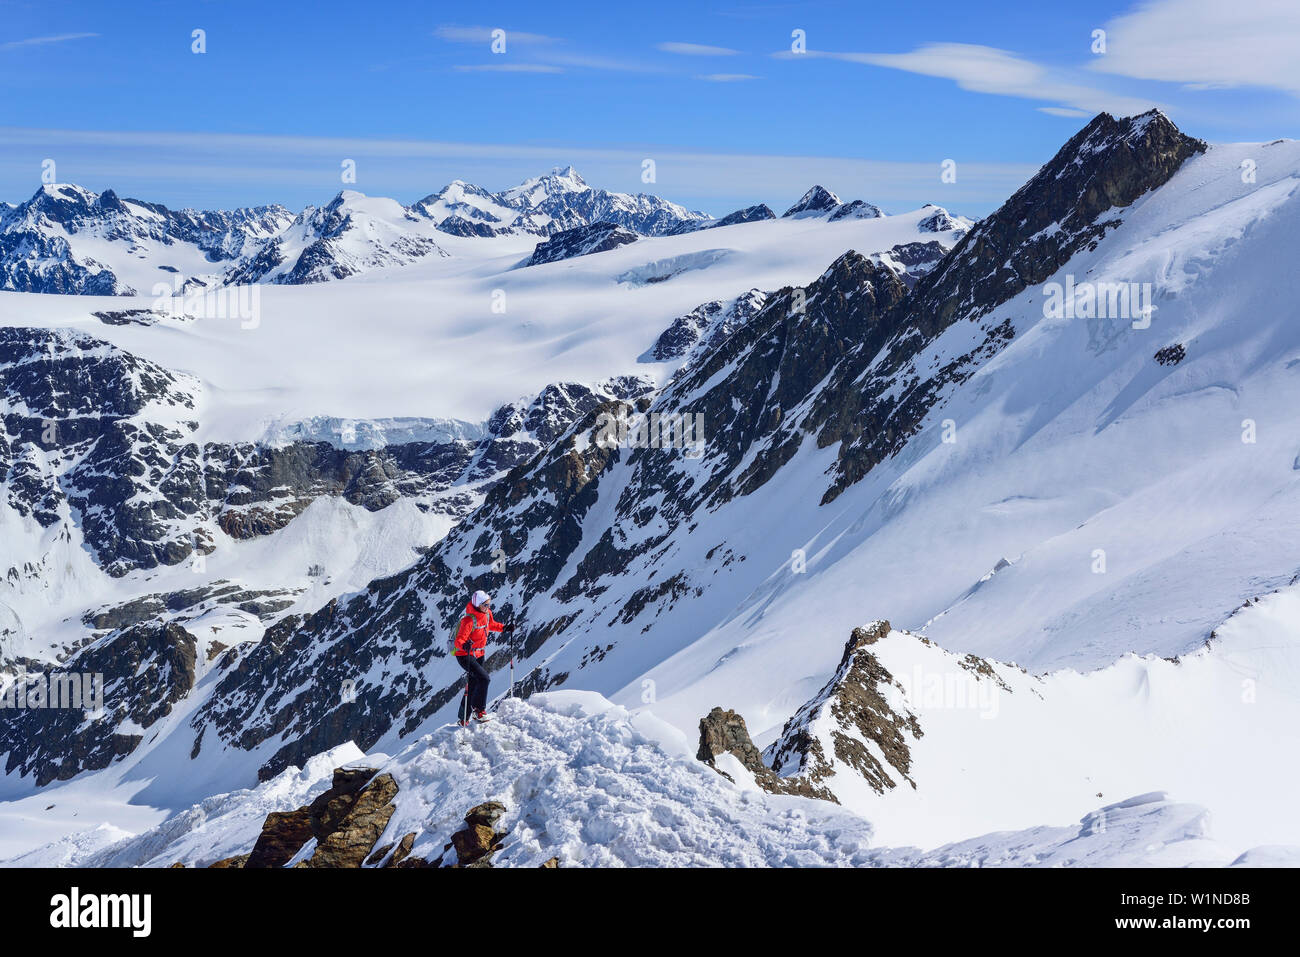 Woman back-country skiing ascending towards Aeusserer Baerenbartkogel, Aeusserer Baerenbartkogel, valley of Langtaufers, Vinschgau, Oetztal Alps, Sout Stock Photo